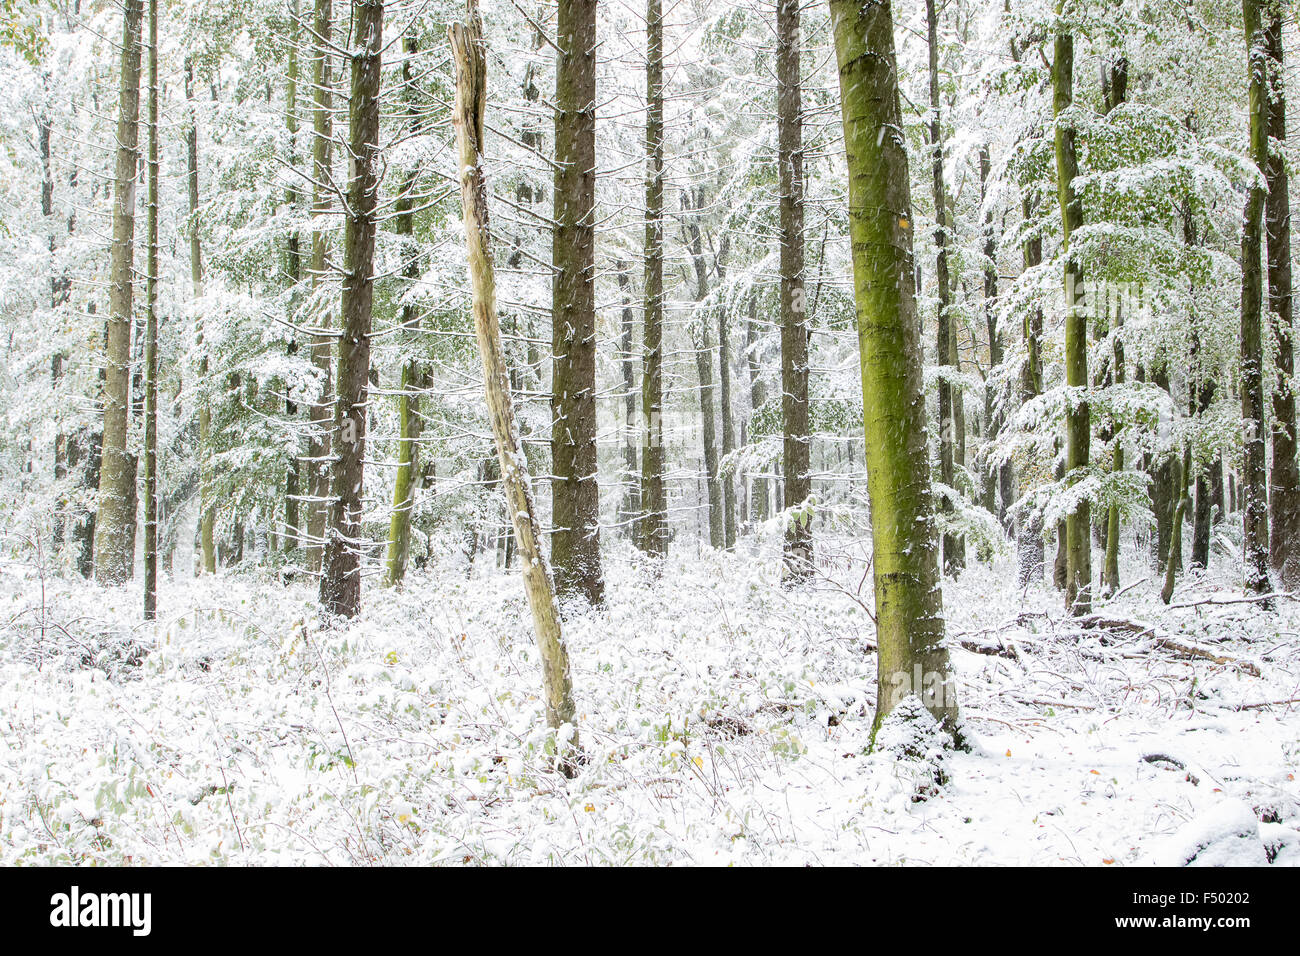 Early onset of winter, trees, forest with snow, Hesse, Germany Stock Photo